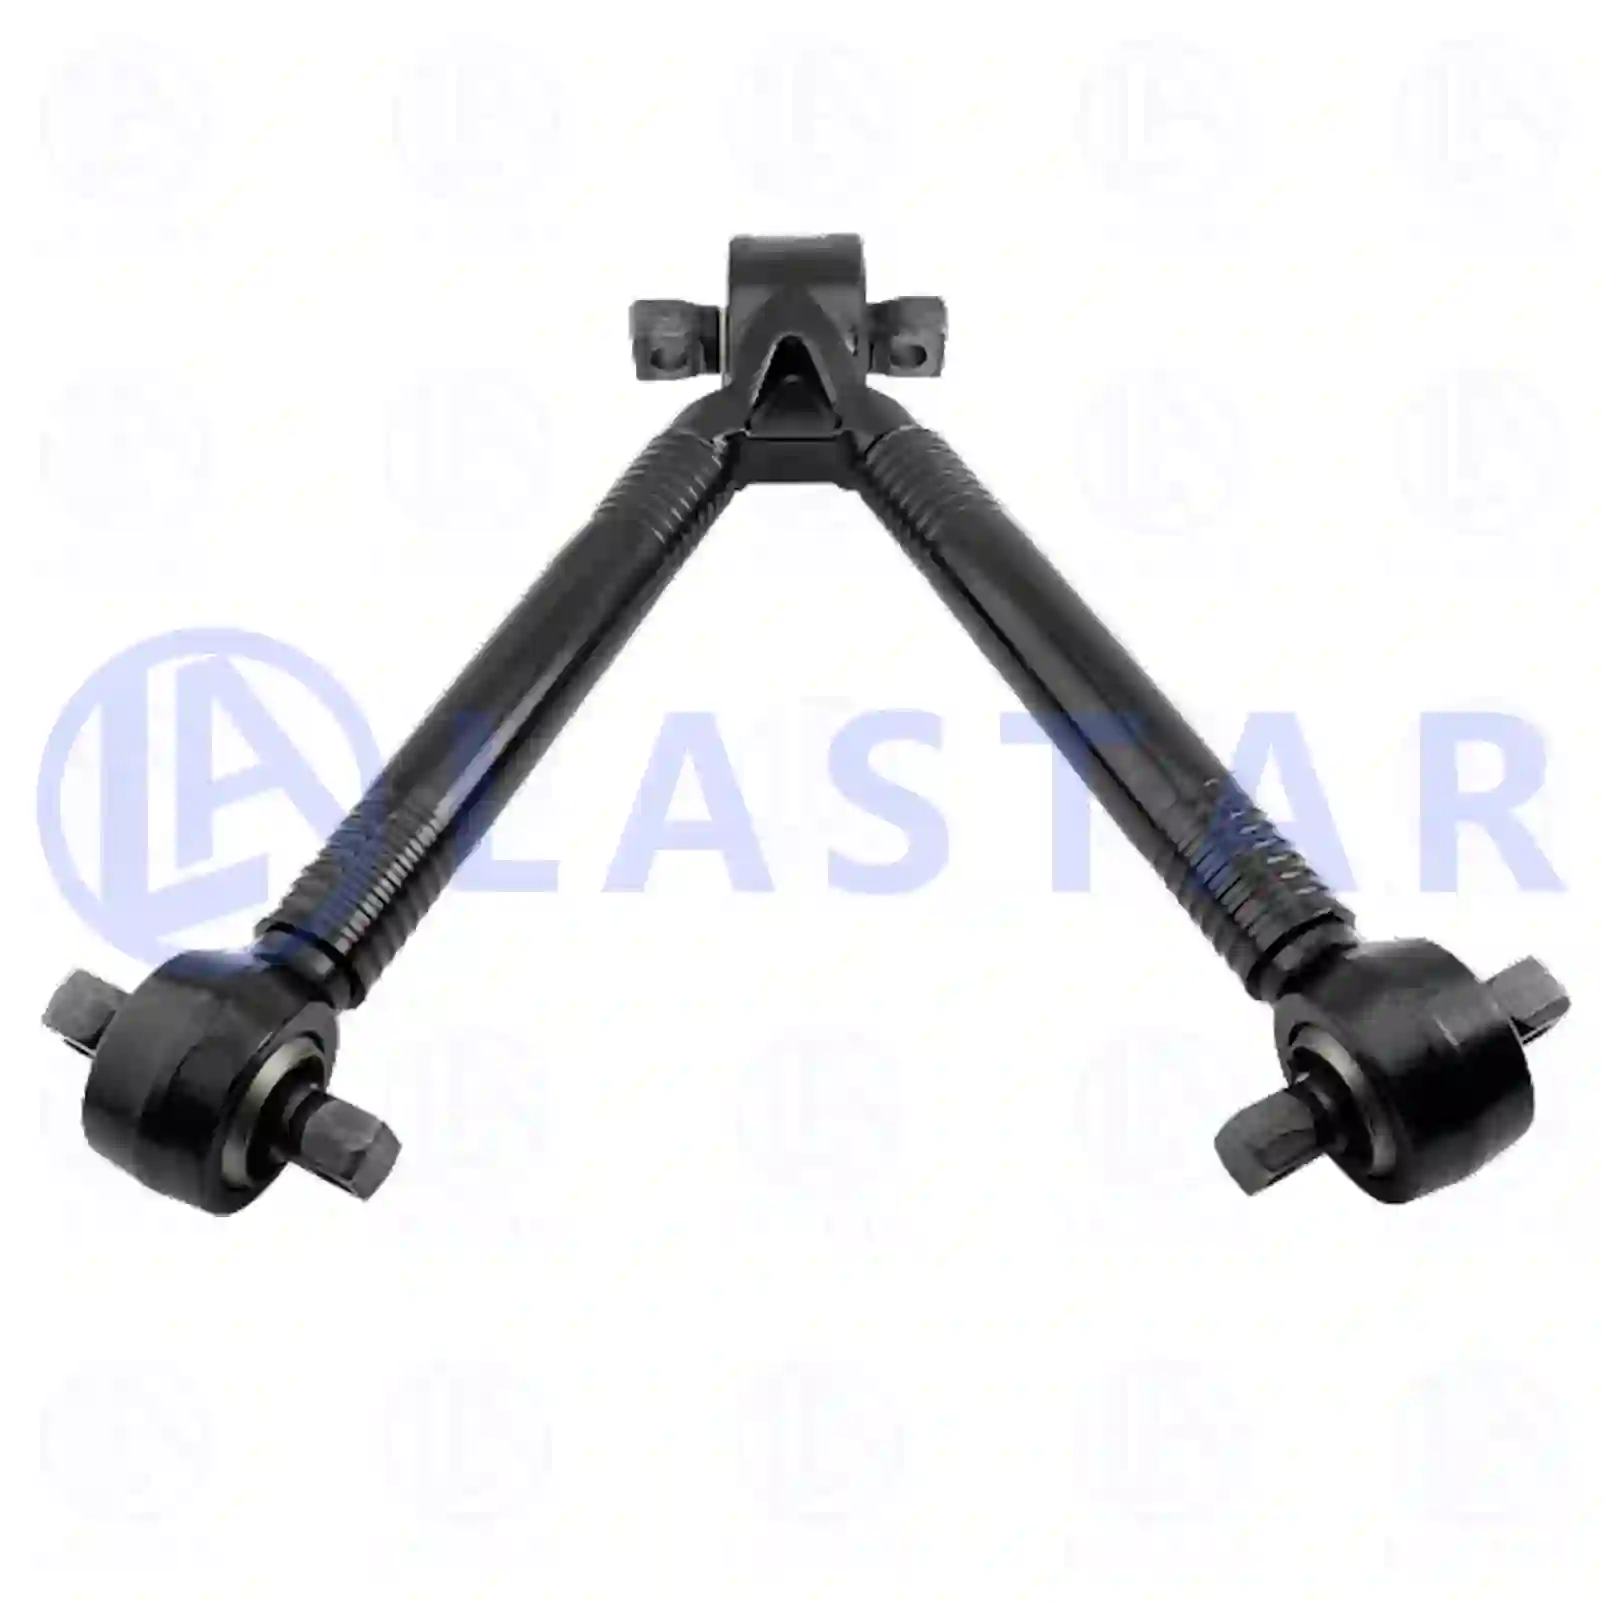 V-stay, 77727787, 9483502205, 9483501705, 9483502205, ||  77727787 Lastar Spare Part | Truck Spare Parts, Auotomotive Spare Parts V-stay, 77727787, 9483502205, 9483501705, 9483502205, ||  77727787 Lastar Spare Part | Truck Spare Parts, Auotomotive Spare Parts